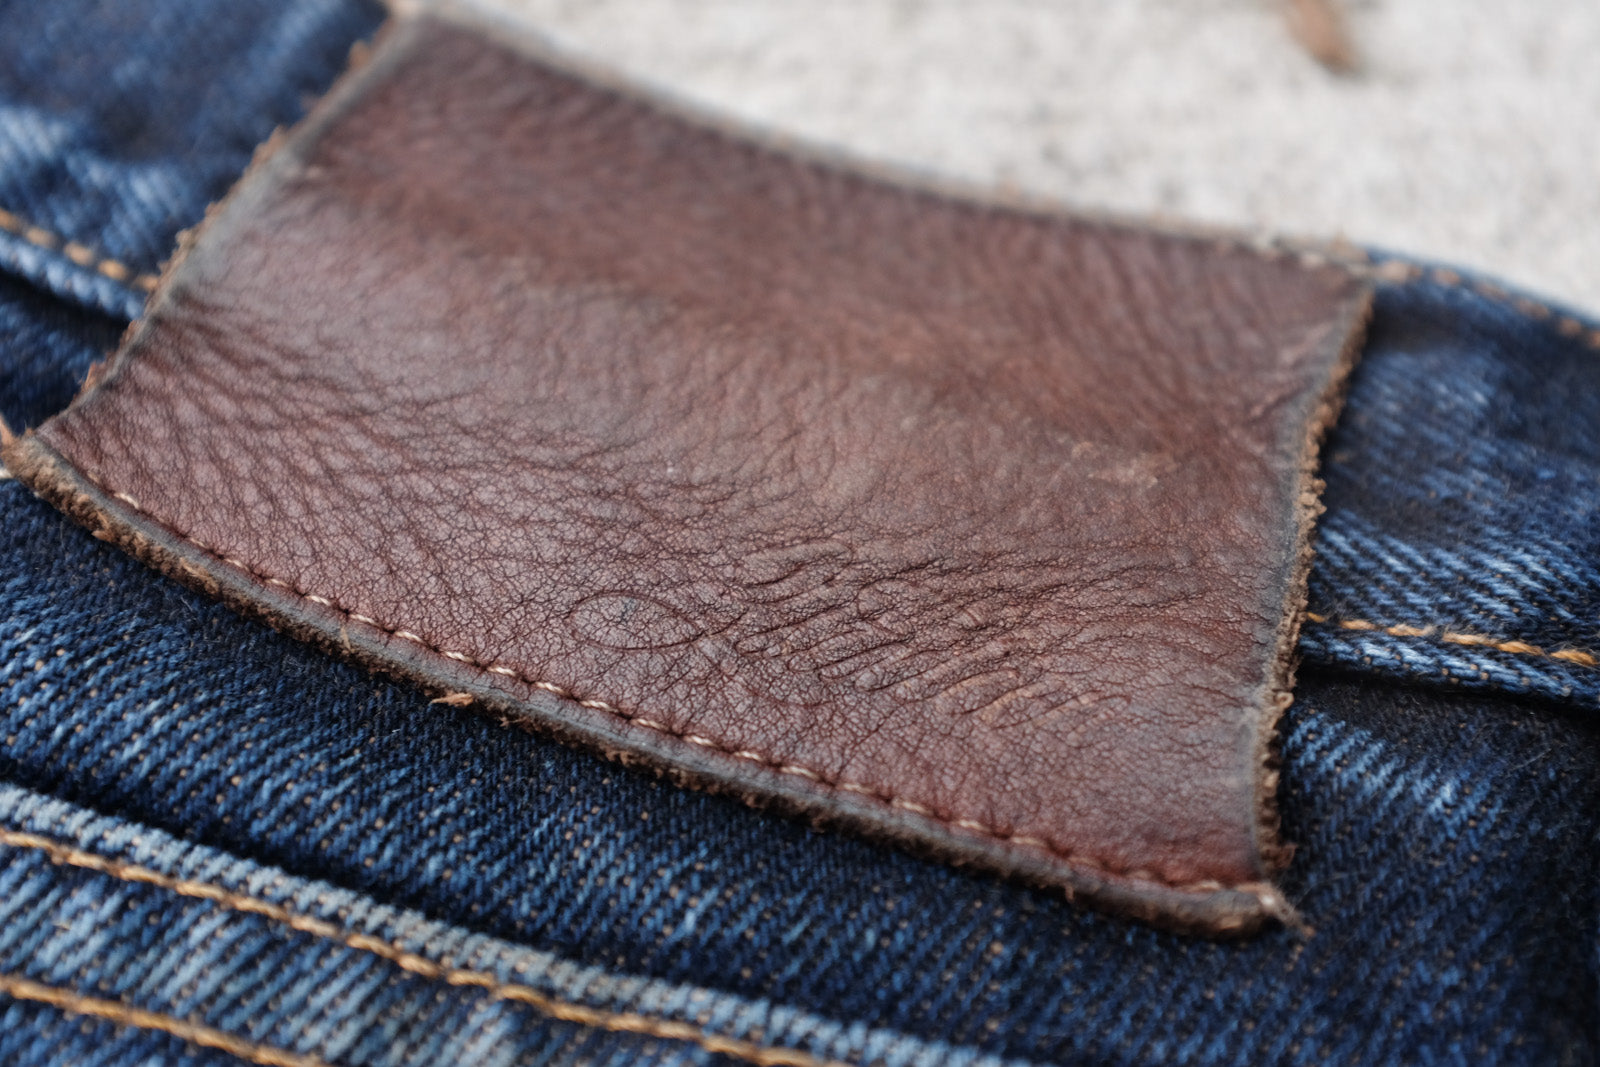 Detail photo of the worn leather patch on the rear of the jeans which has darkened and developed a scale-like pattern as it has aged.